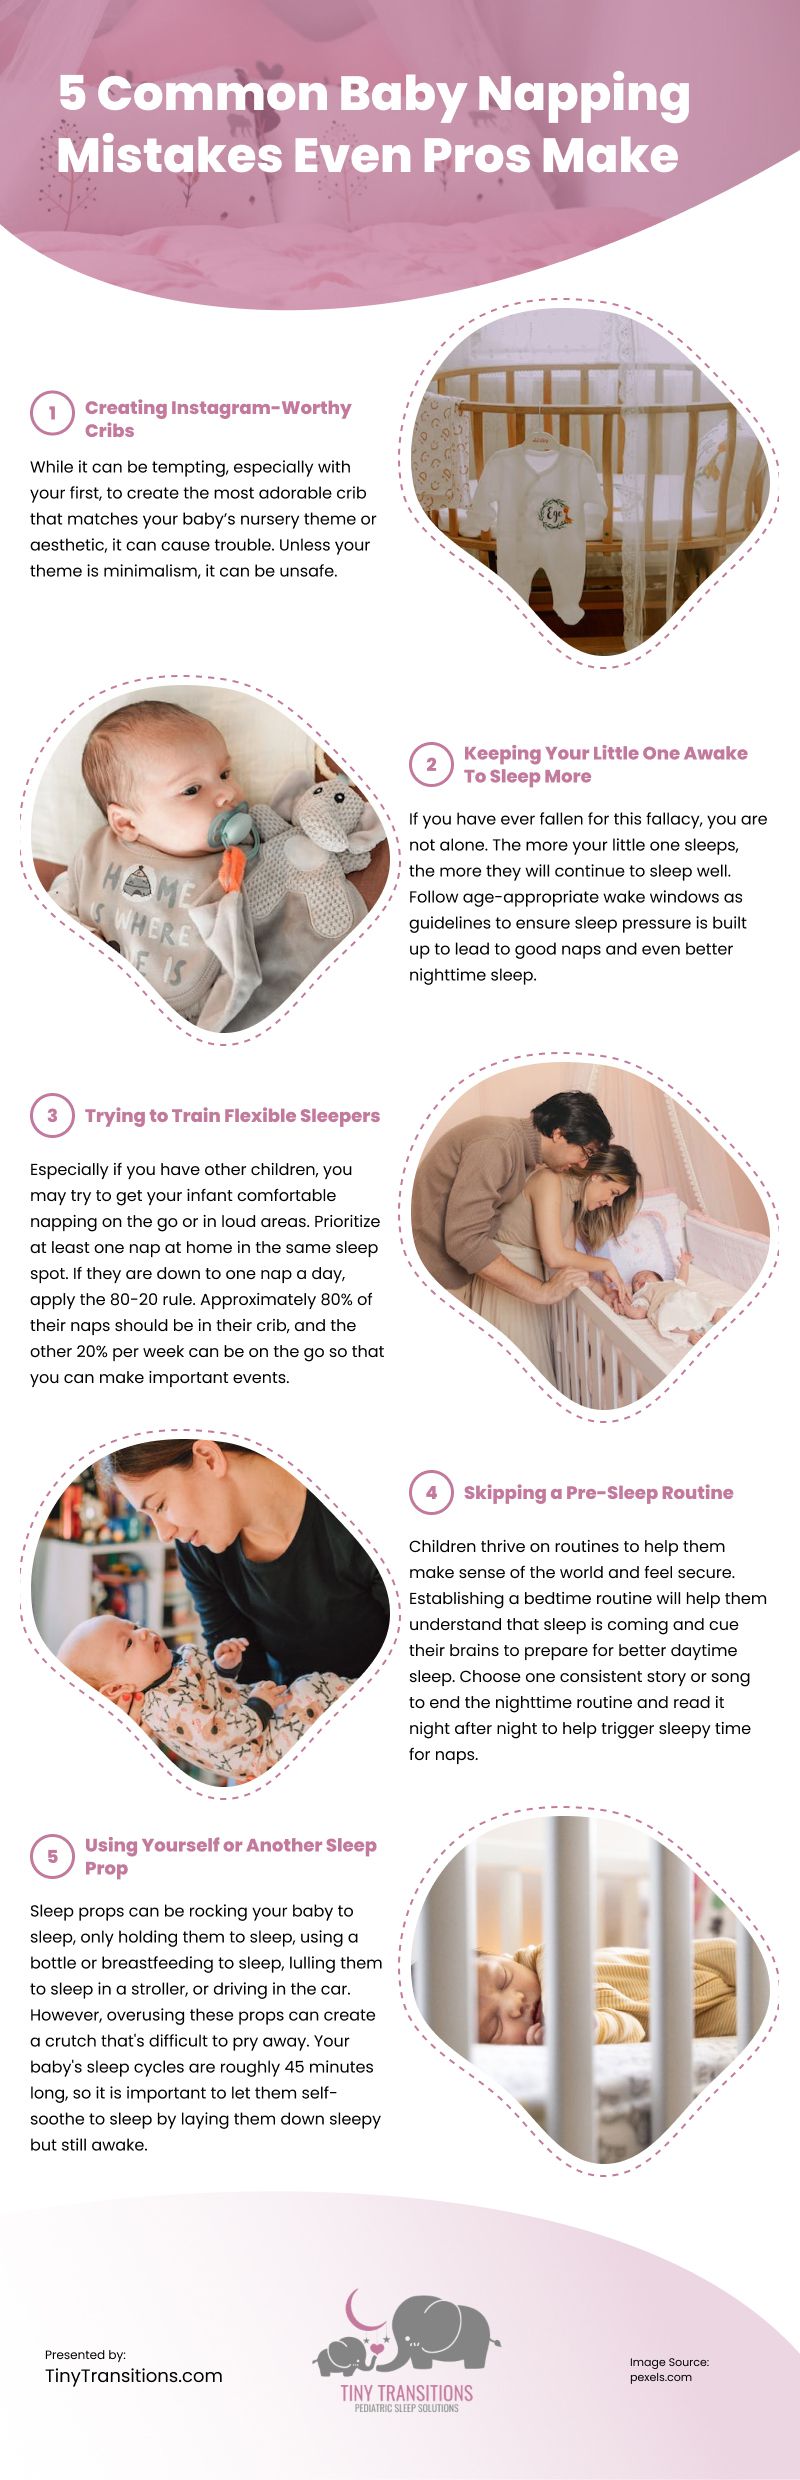 5 Common Baby Napping Mistakes Even Pros Make Infographic